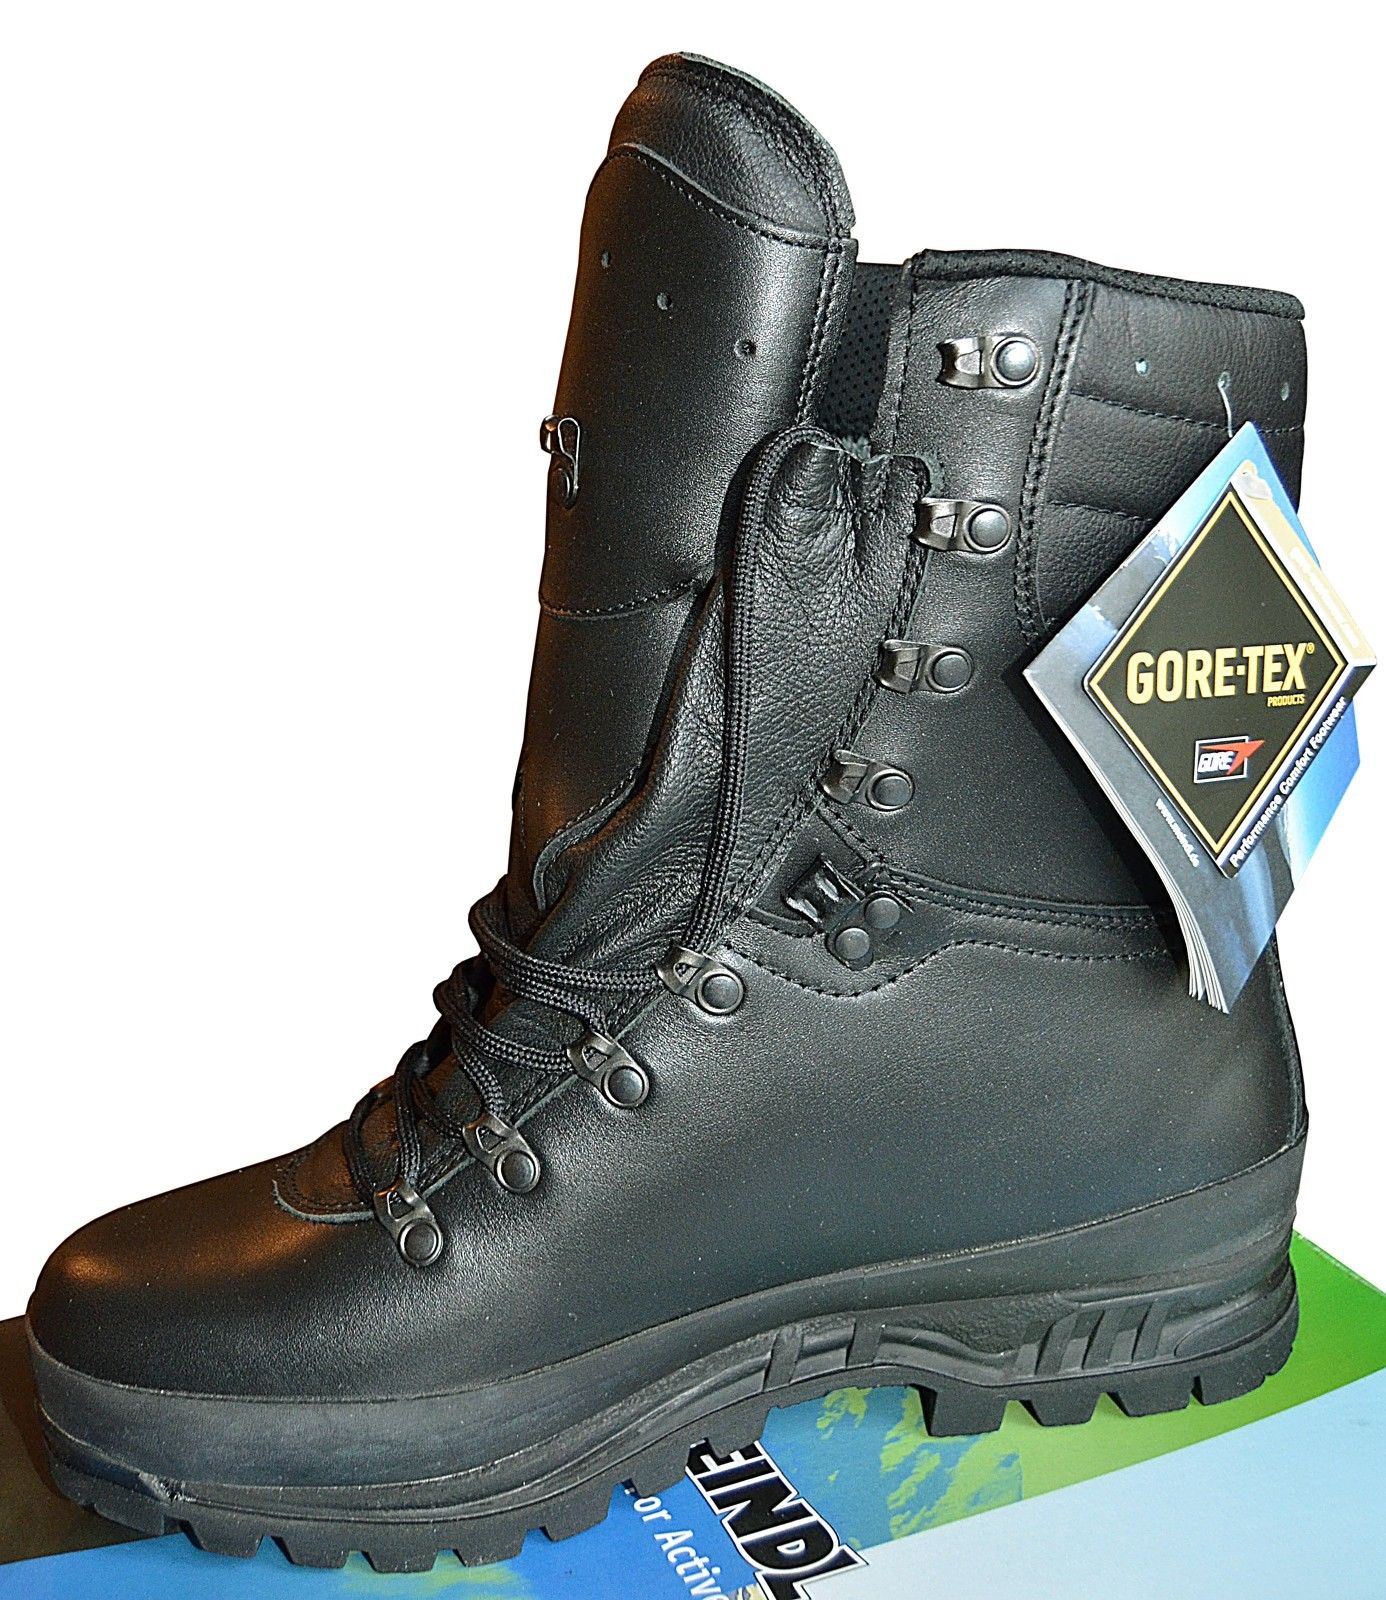 moord privacy eetpatroon Feline Shoes / Rangers / Meindl Response Boots, Gore -Tex - Cold Weather -  French Army eskb501mndl : securemail.fr